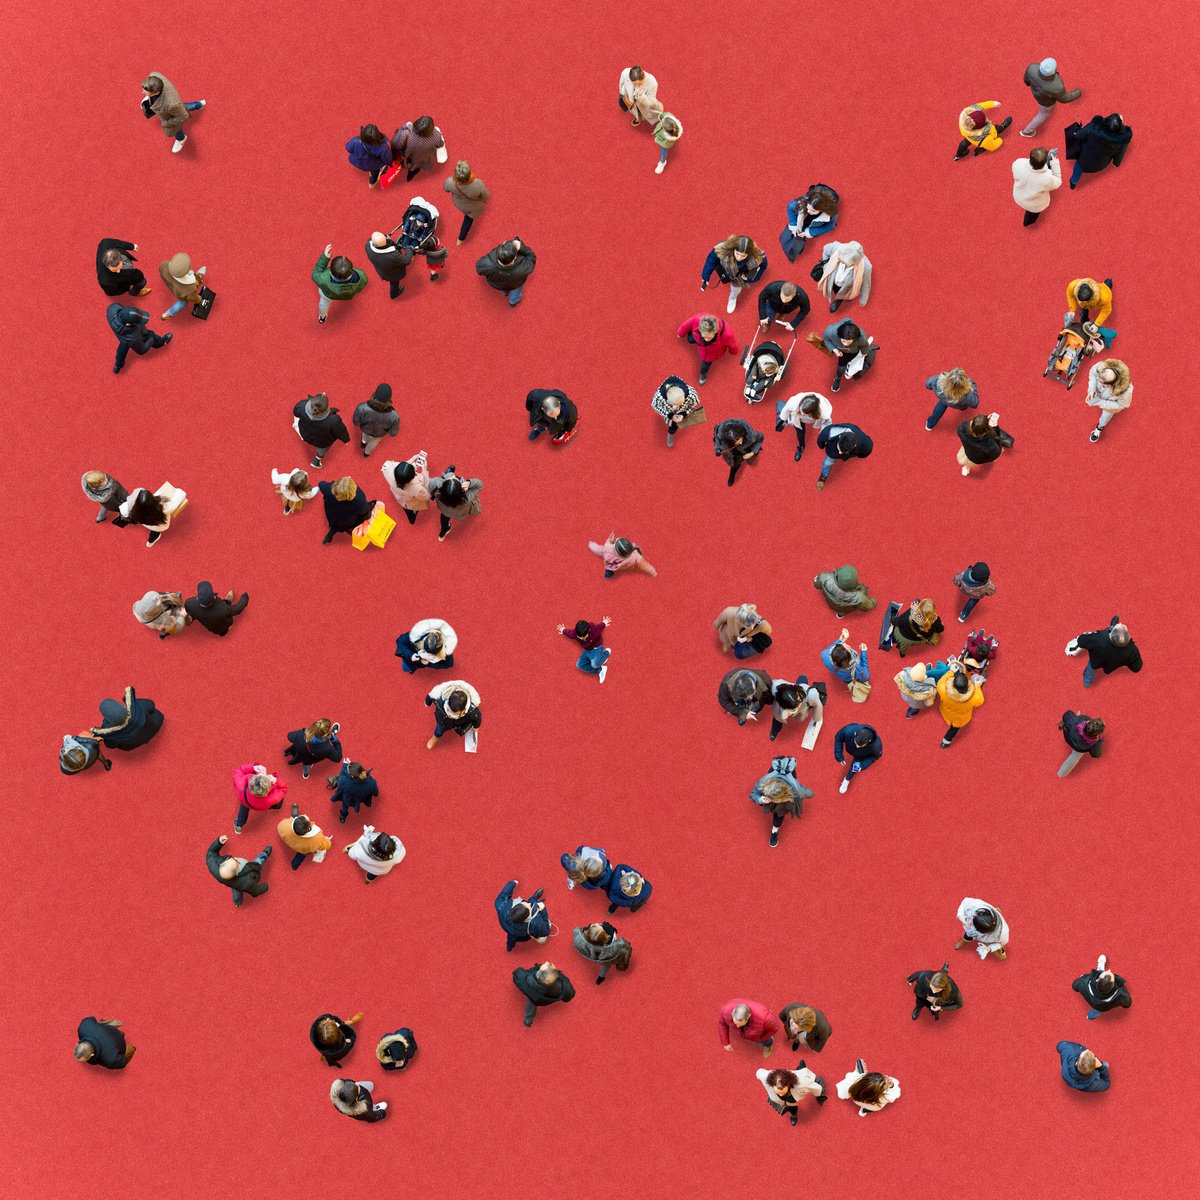 The World From Above - Red Together (1/10) by Werner Roelandt